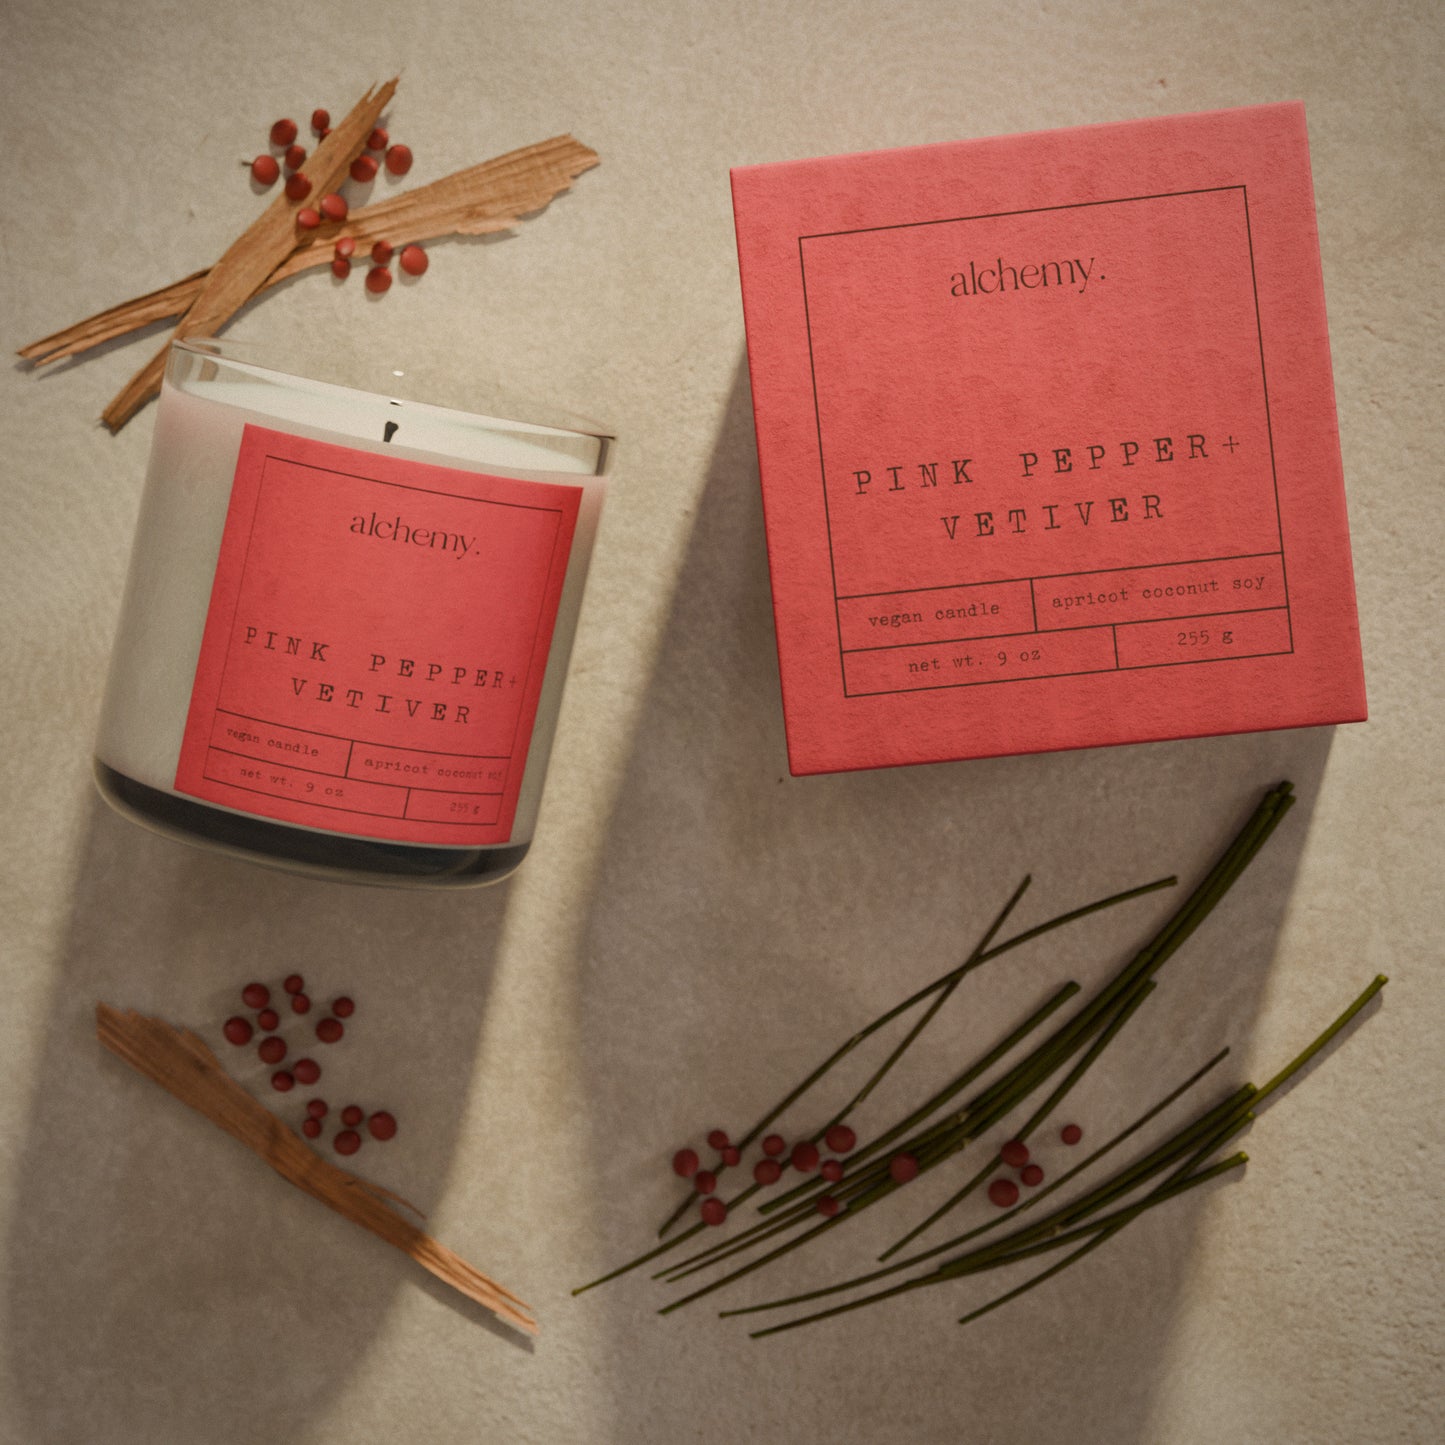 Pink Pepper + Vetiver Candle